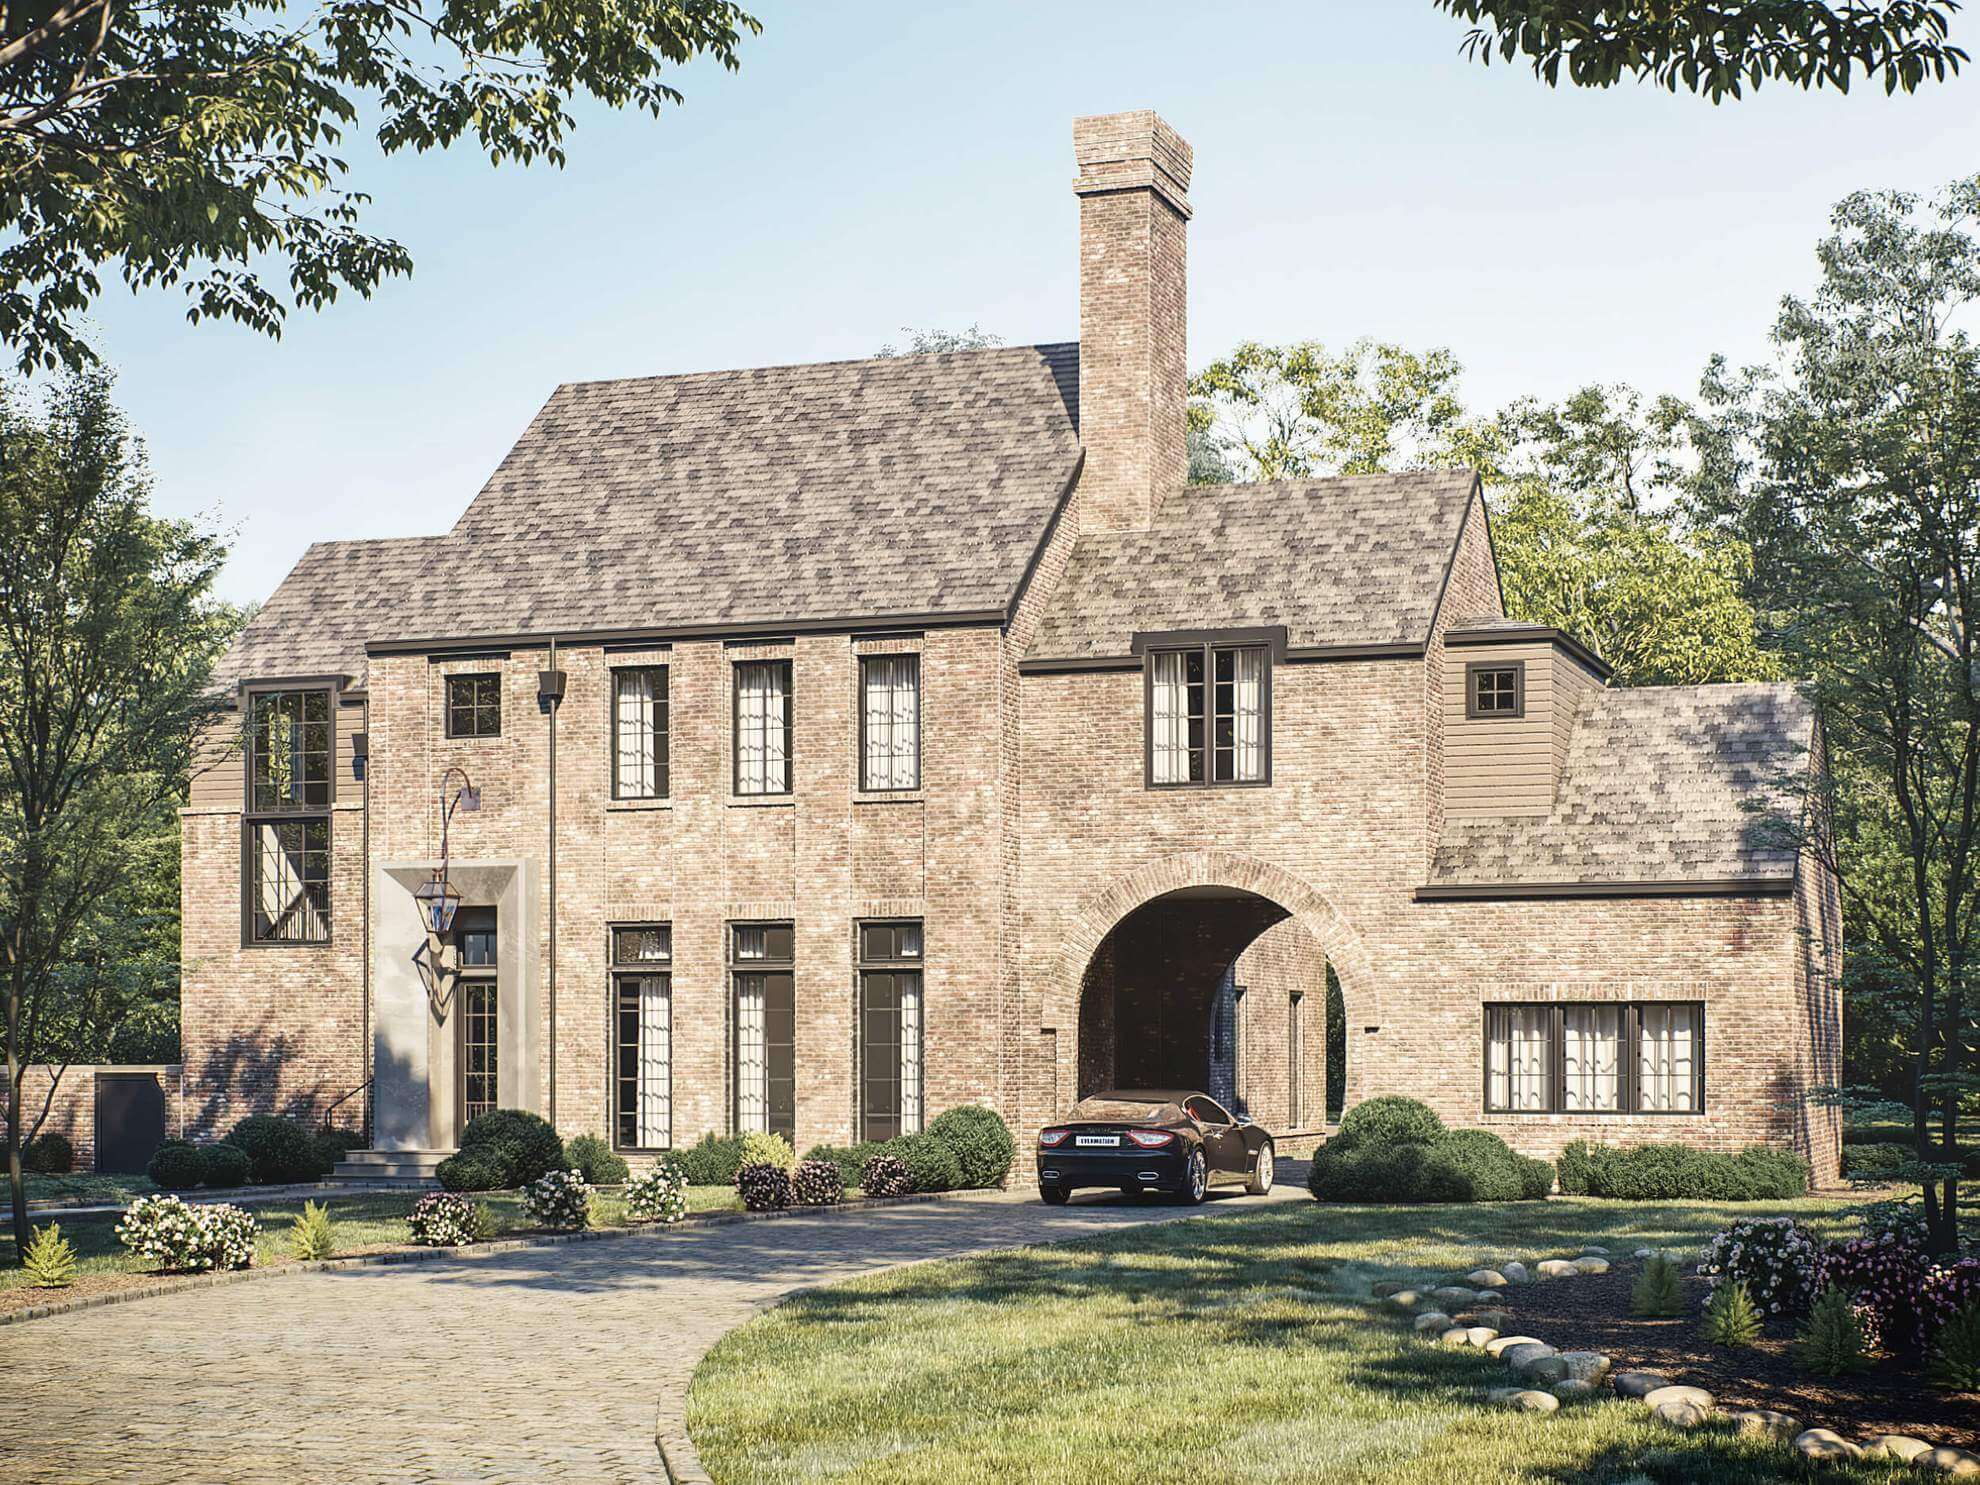 3D Exterior Visualization Of A High-End Estate